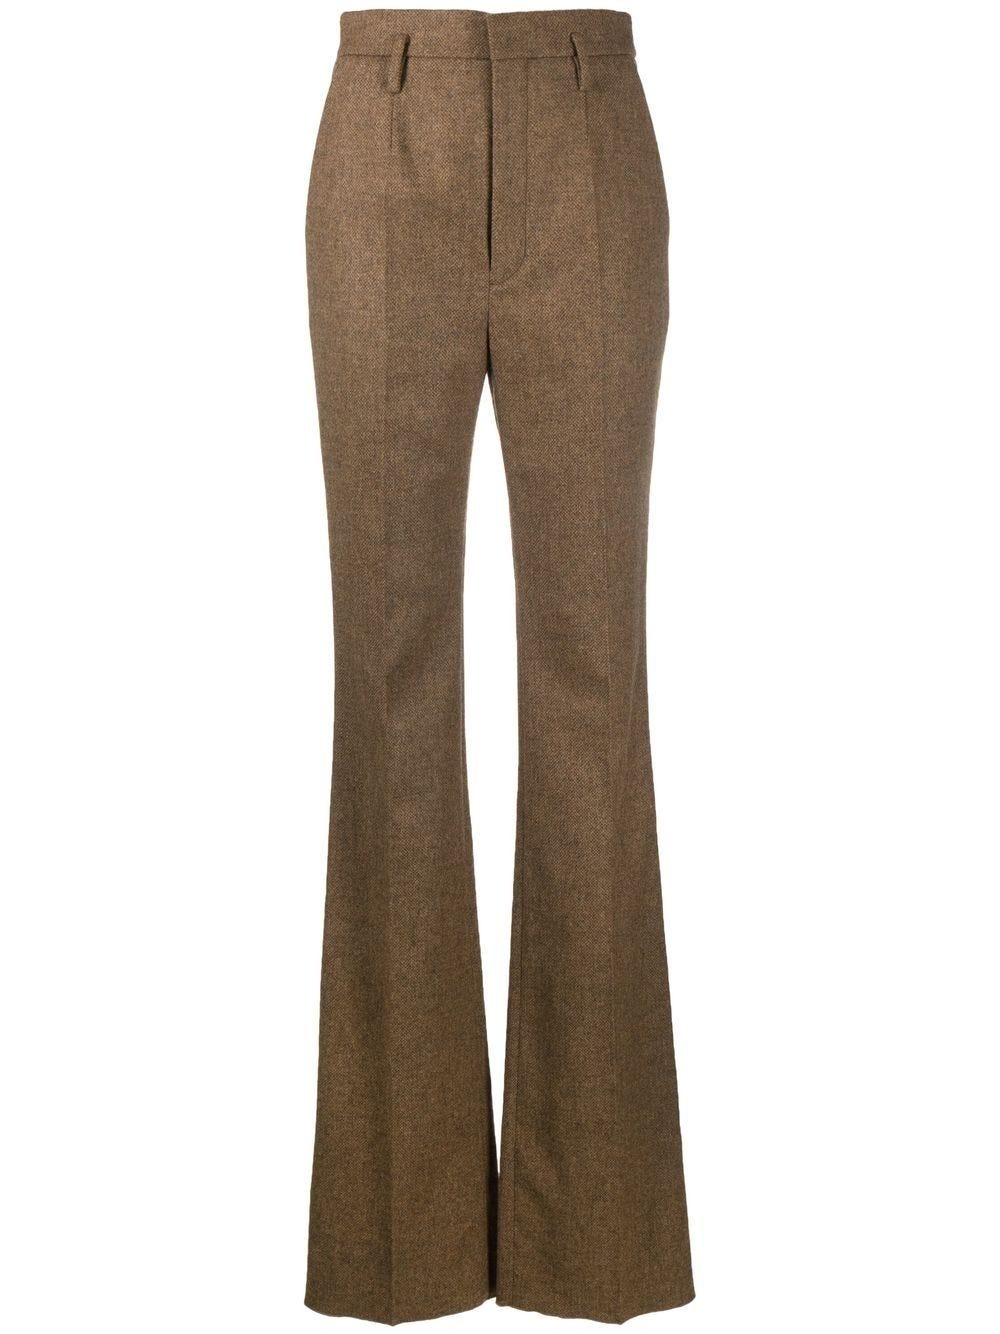 SAINT LAURENT BROWN TAILORED HIGH-WAISTED PANTS